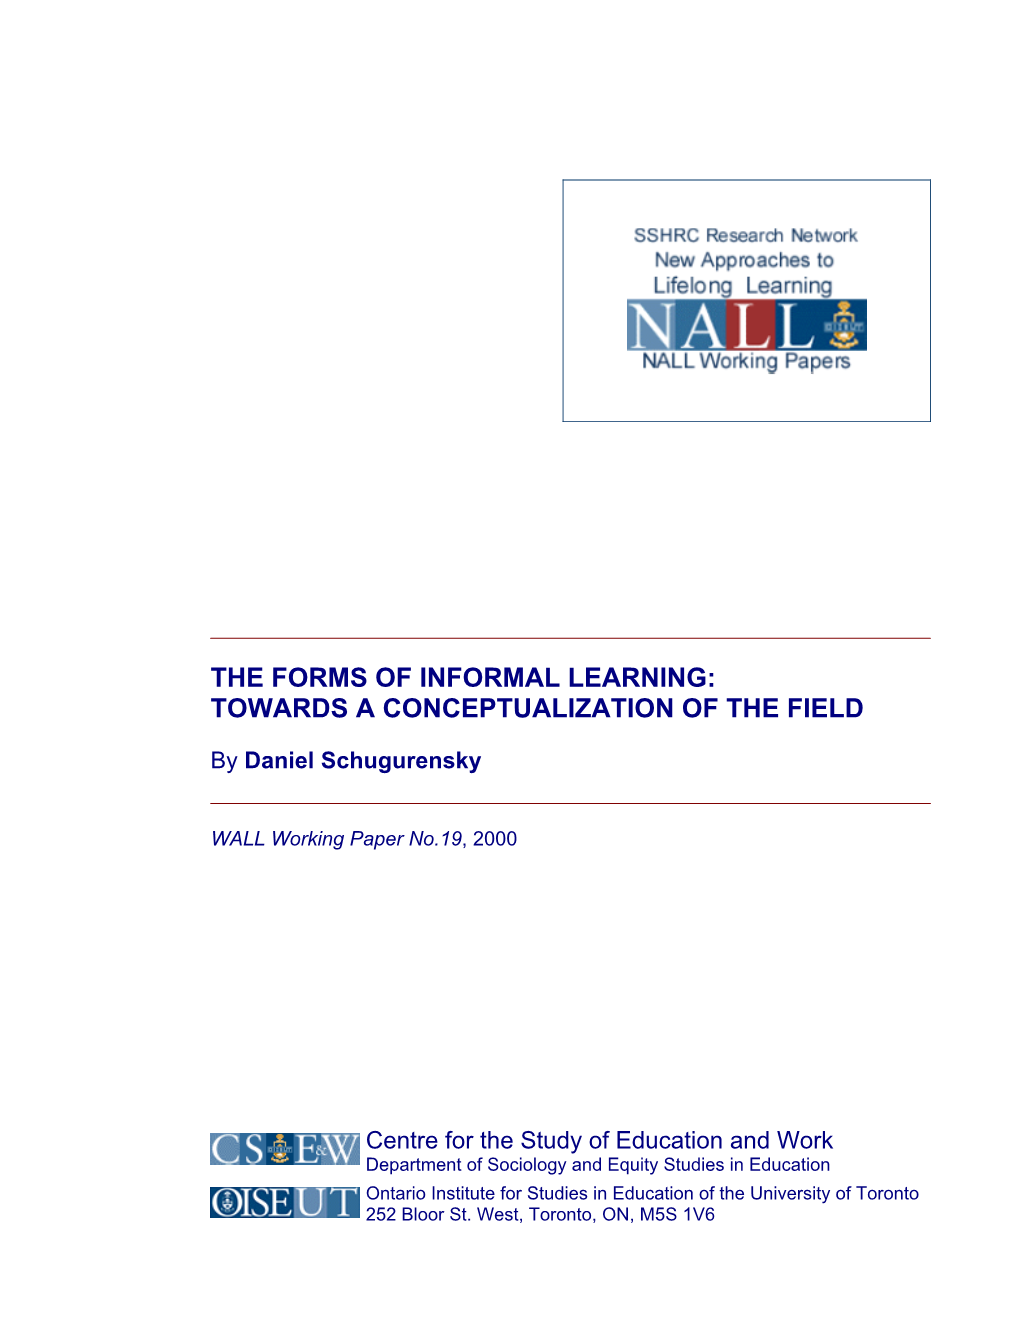 The Forms of Informal Learning: Towards a Conceptualization of the Field